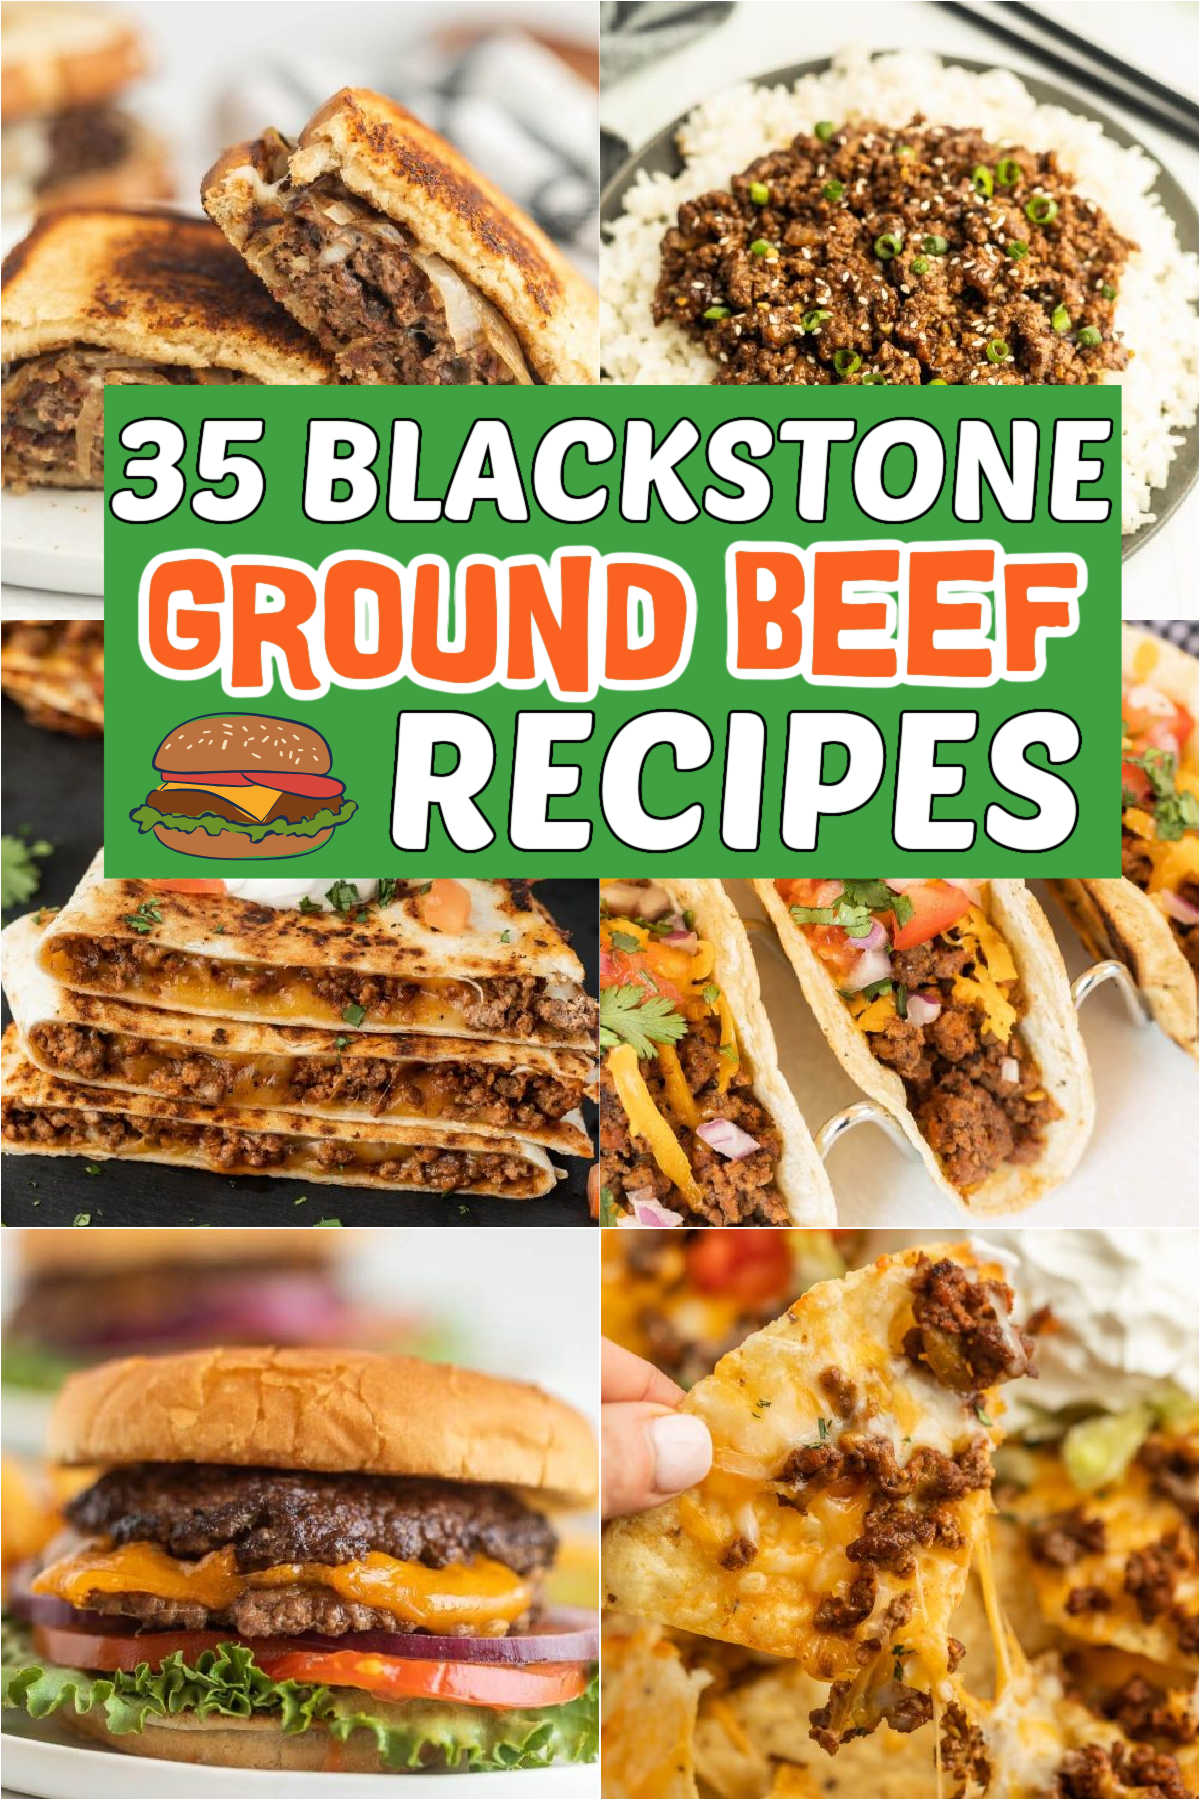 Blackstone Ground Beef Recipes make for easy weeknight meals. These recipes are loaded with flavor and easy to make on the griddle. he beef mixture cooks perfectly on the griddle and easily cooks with so much flavor. These recipes can be made in a variety of ways by using ground turkey or cooking in a cast iron skillet over medium high heat. #eatingonadime #blackstonegroundbeefrecipes #blackstonerecipes